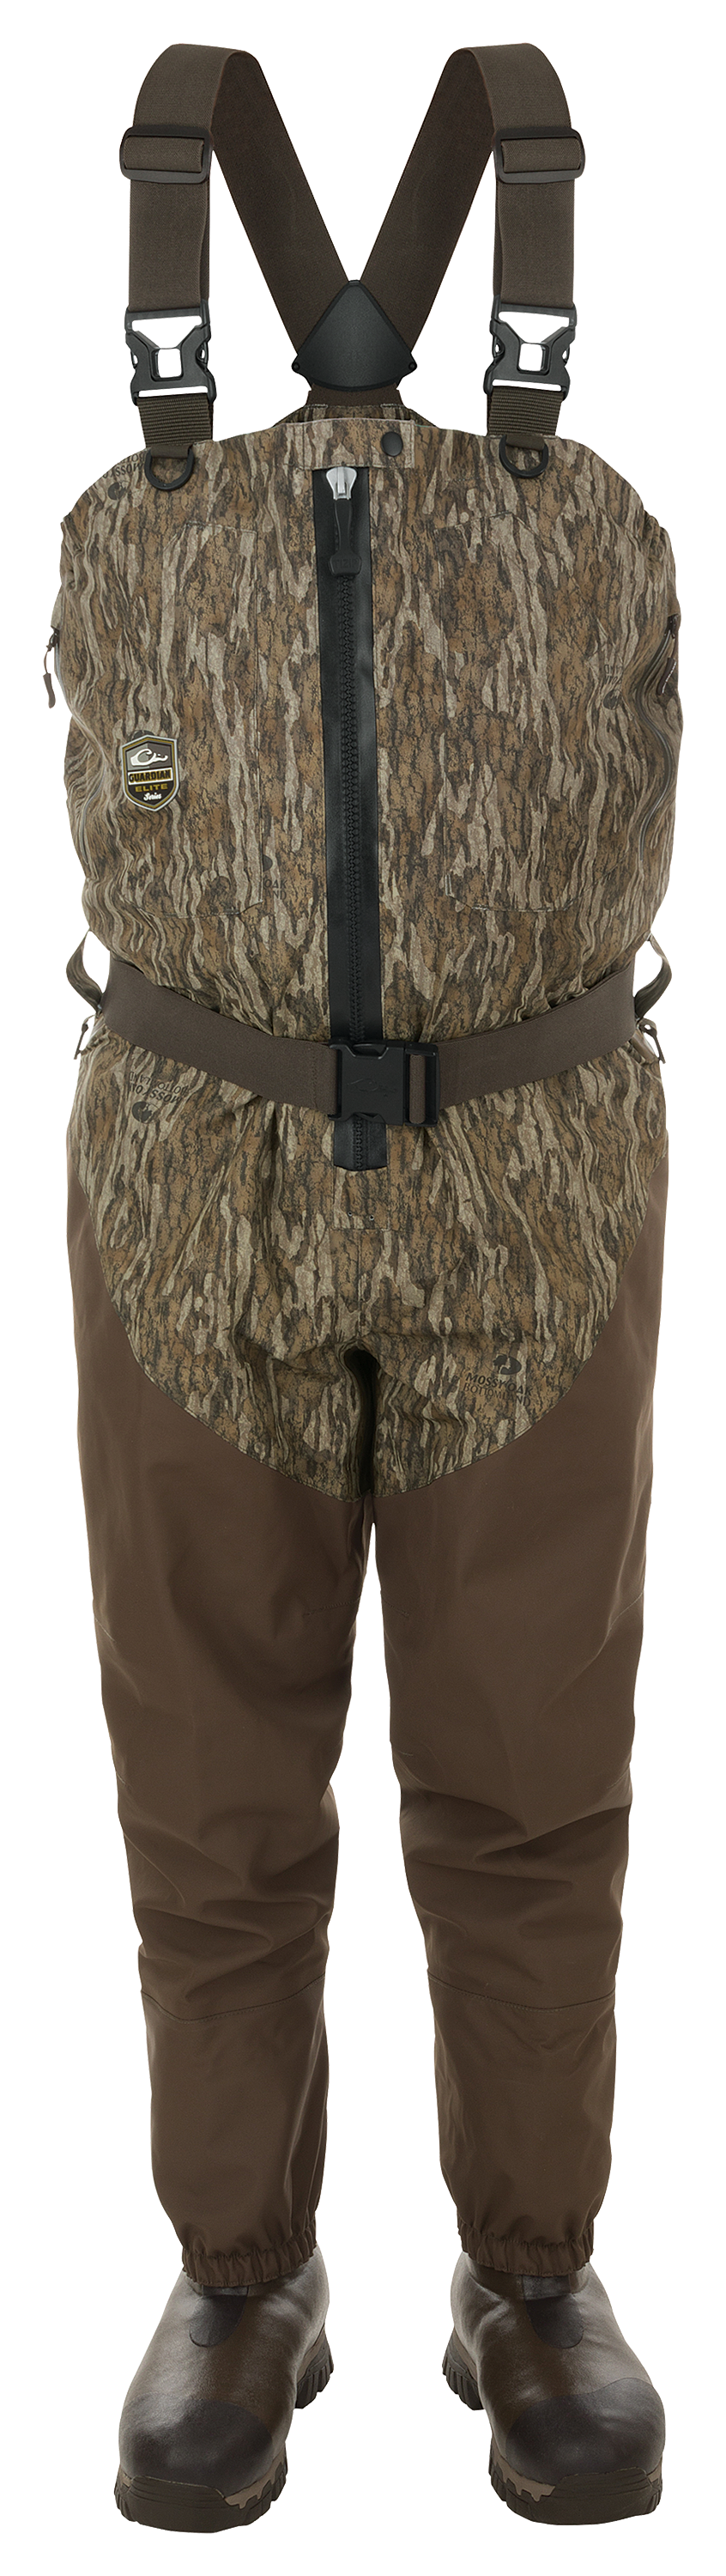 Drake Waterfowl Systems Guardian Elite Front Zip Breathable Waders for Men - Mossy Oak Bottomland - 9/Large